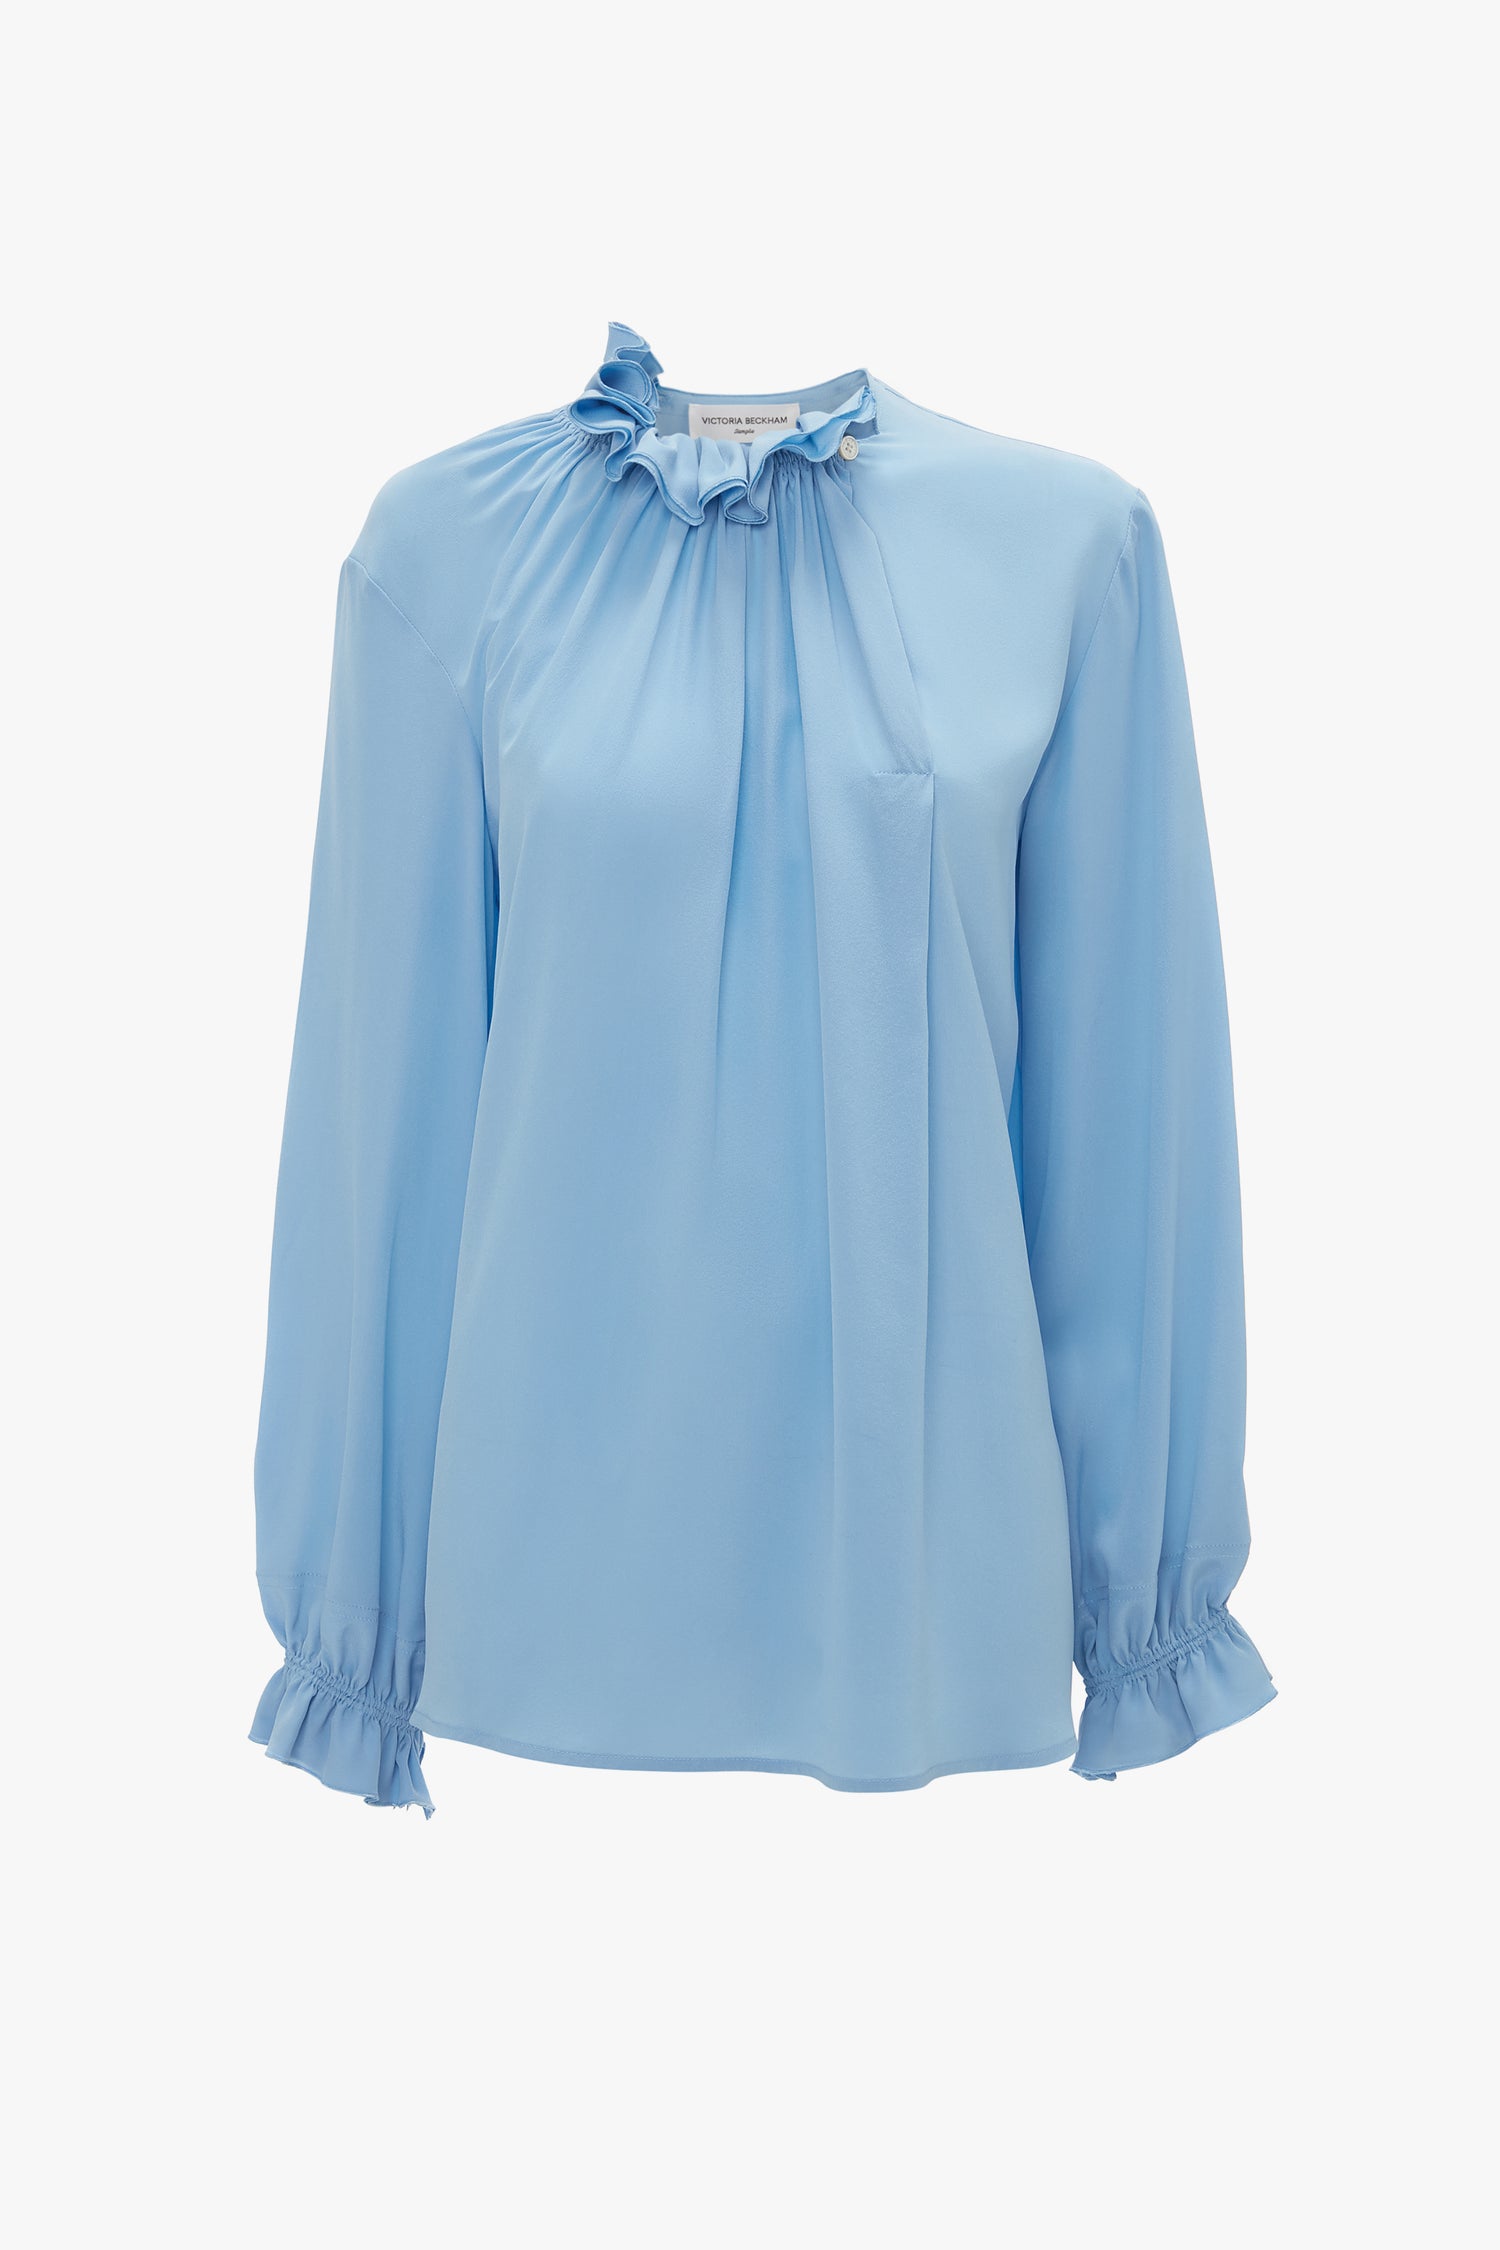 A cornflower blue, long-sleeved crepe de chine blouse with a gathered neckline and ruffled cuffs against a white background. Product: Exclusive Ruffle Neck Blouse In Cornflower Blue by Victoria Beckham.